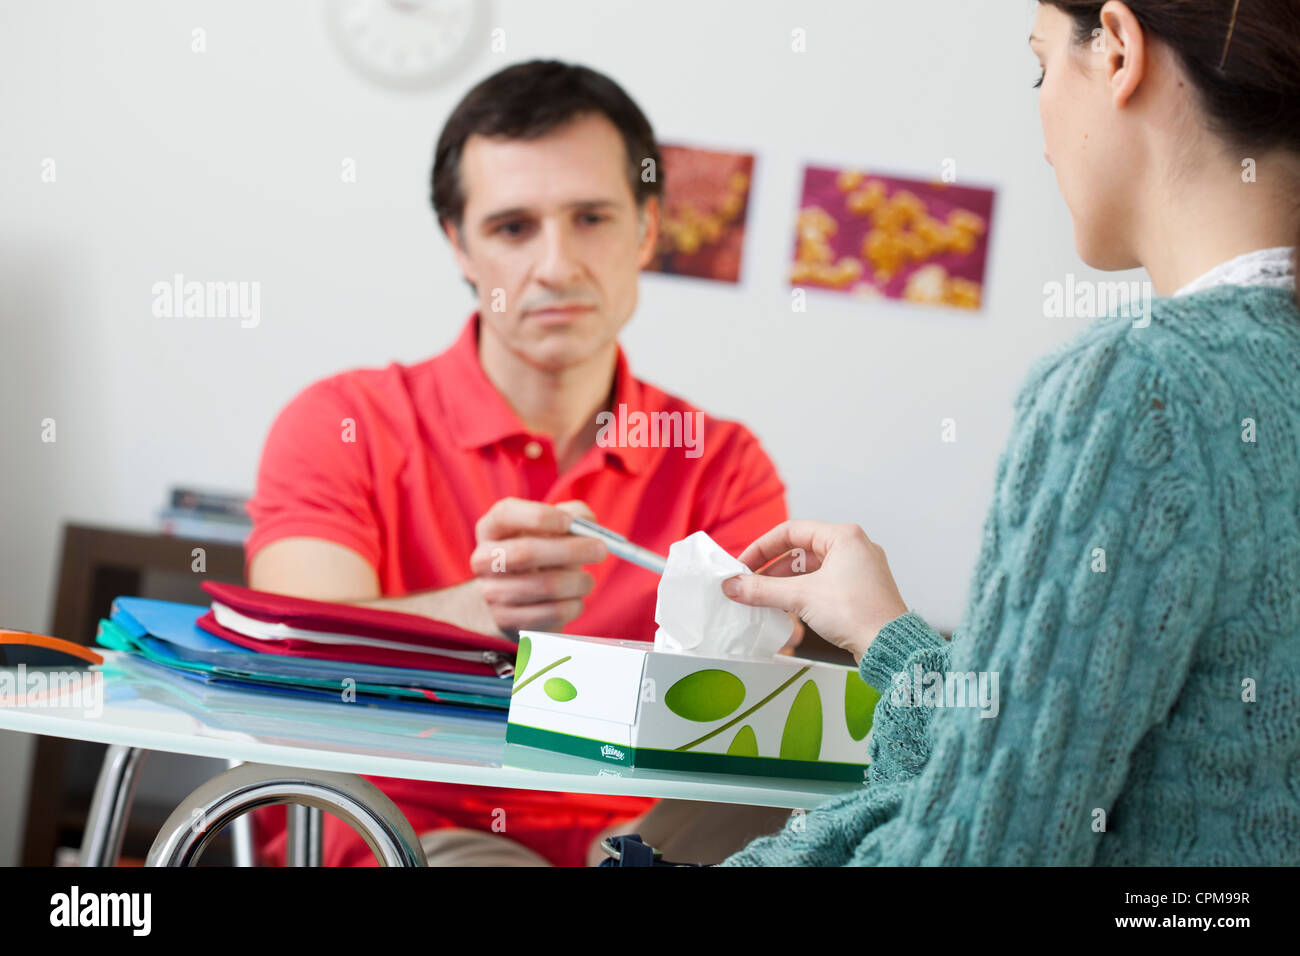 WOMAN IN CONSULTATION, DIALOGUE Stock Photo